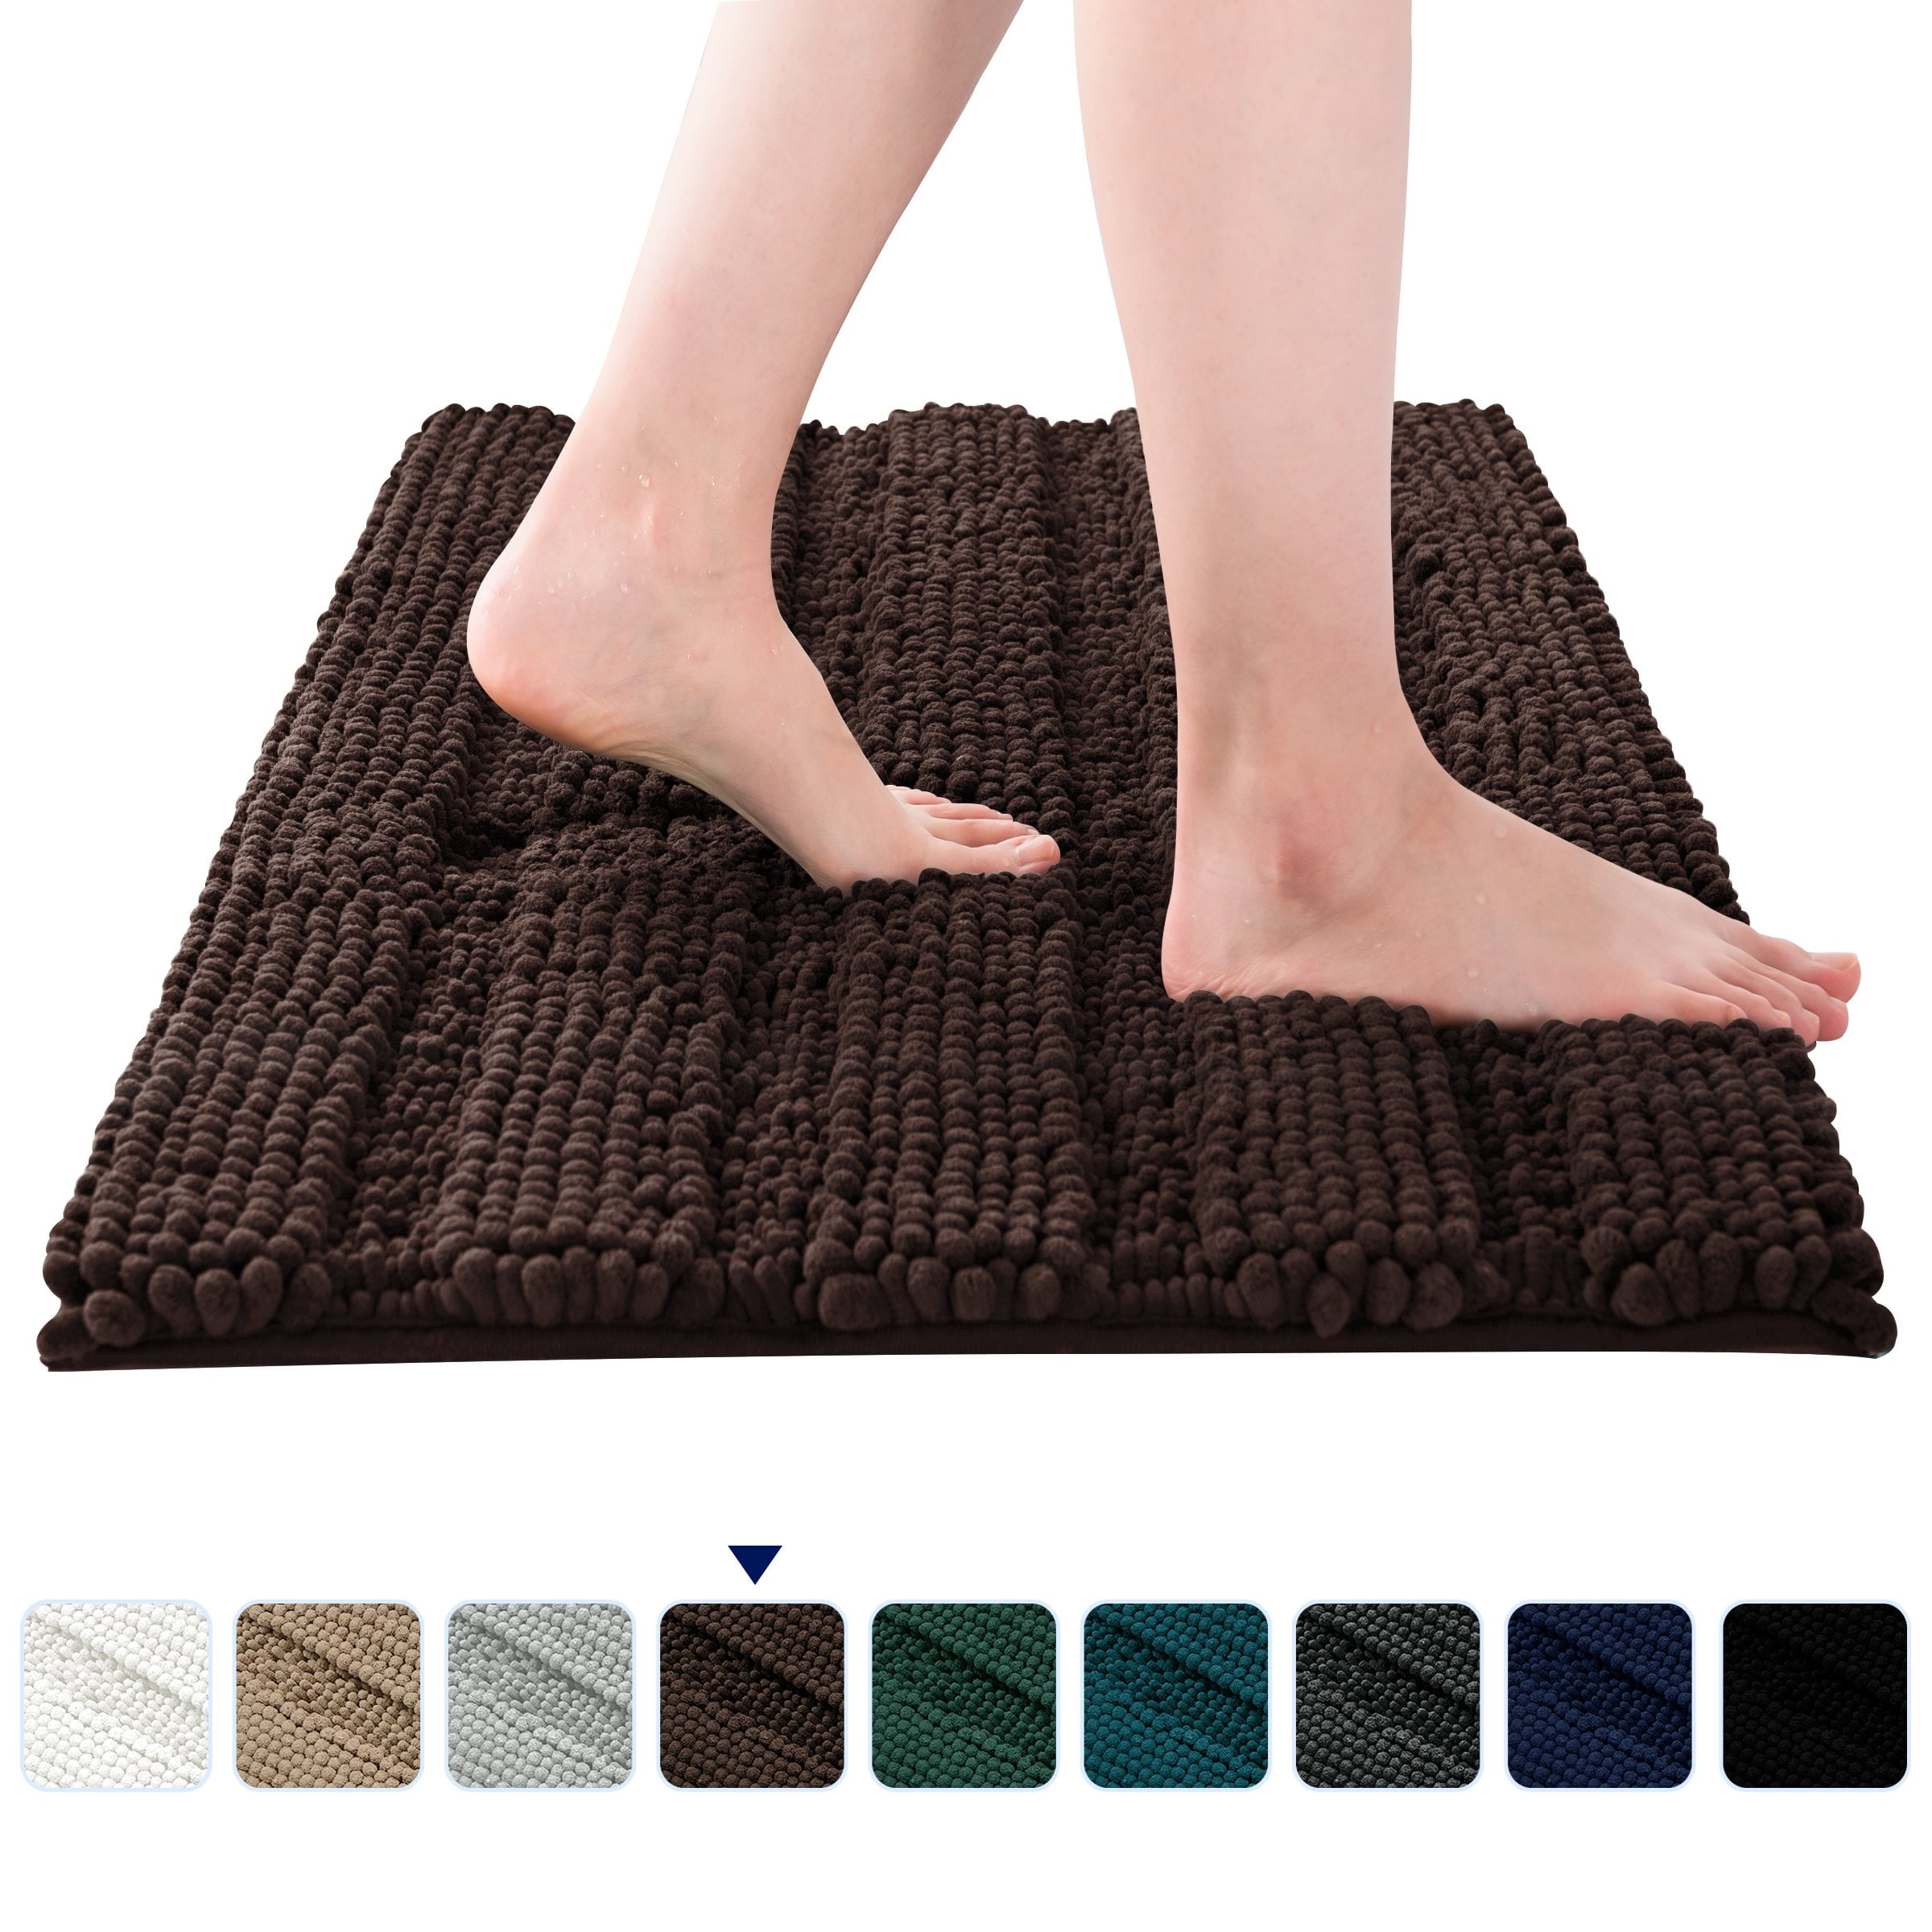 Subrtex Chenille Bathroom Rugs Soft Super Water Absorbing Shower Mats - 24x60 - Taupe Brown